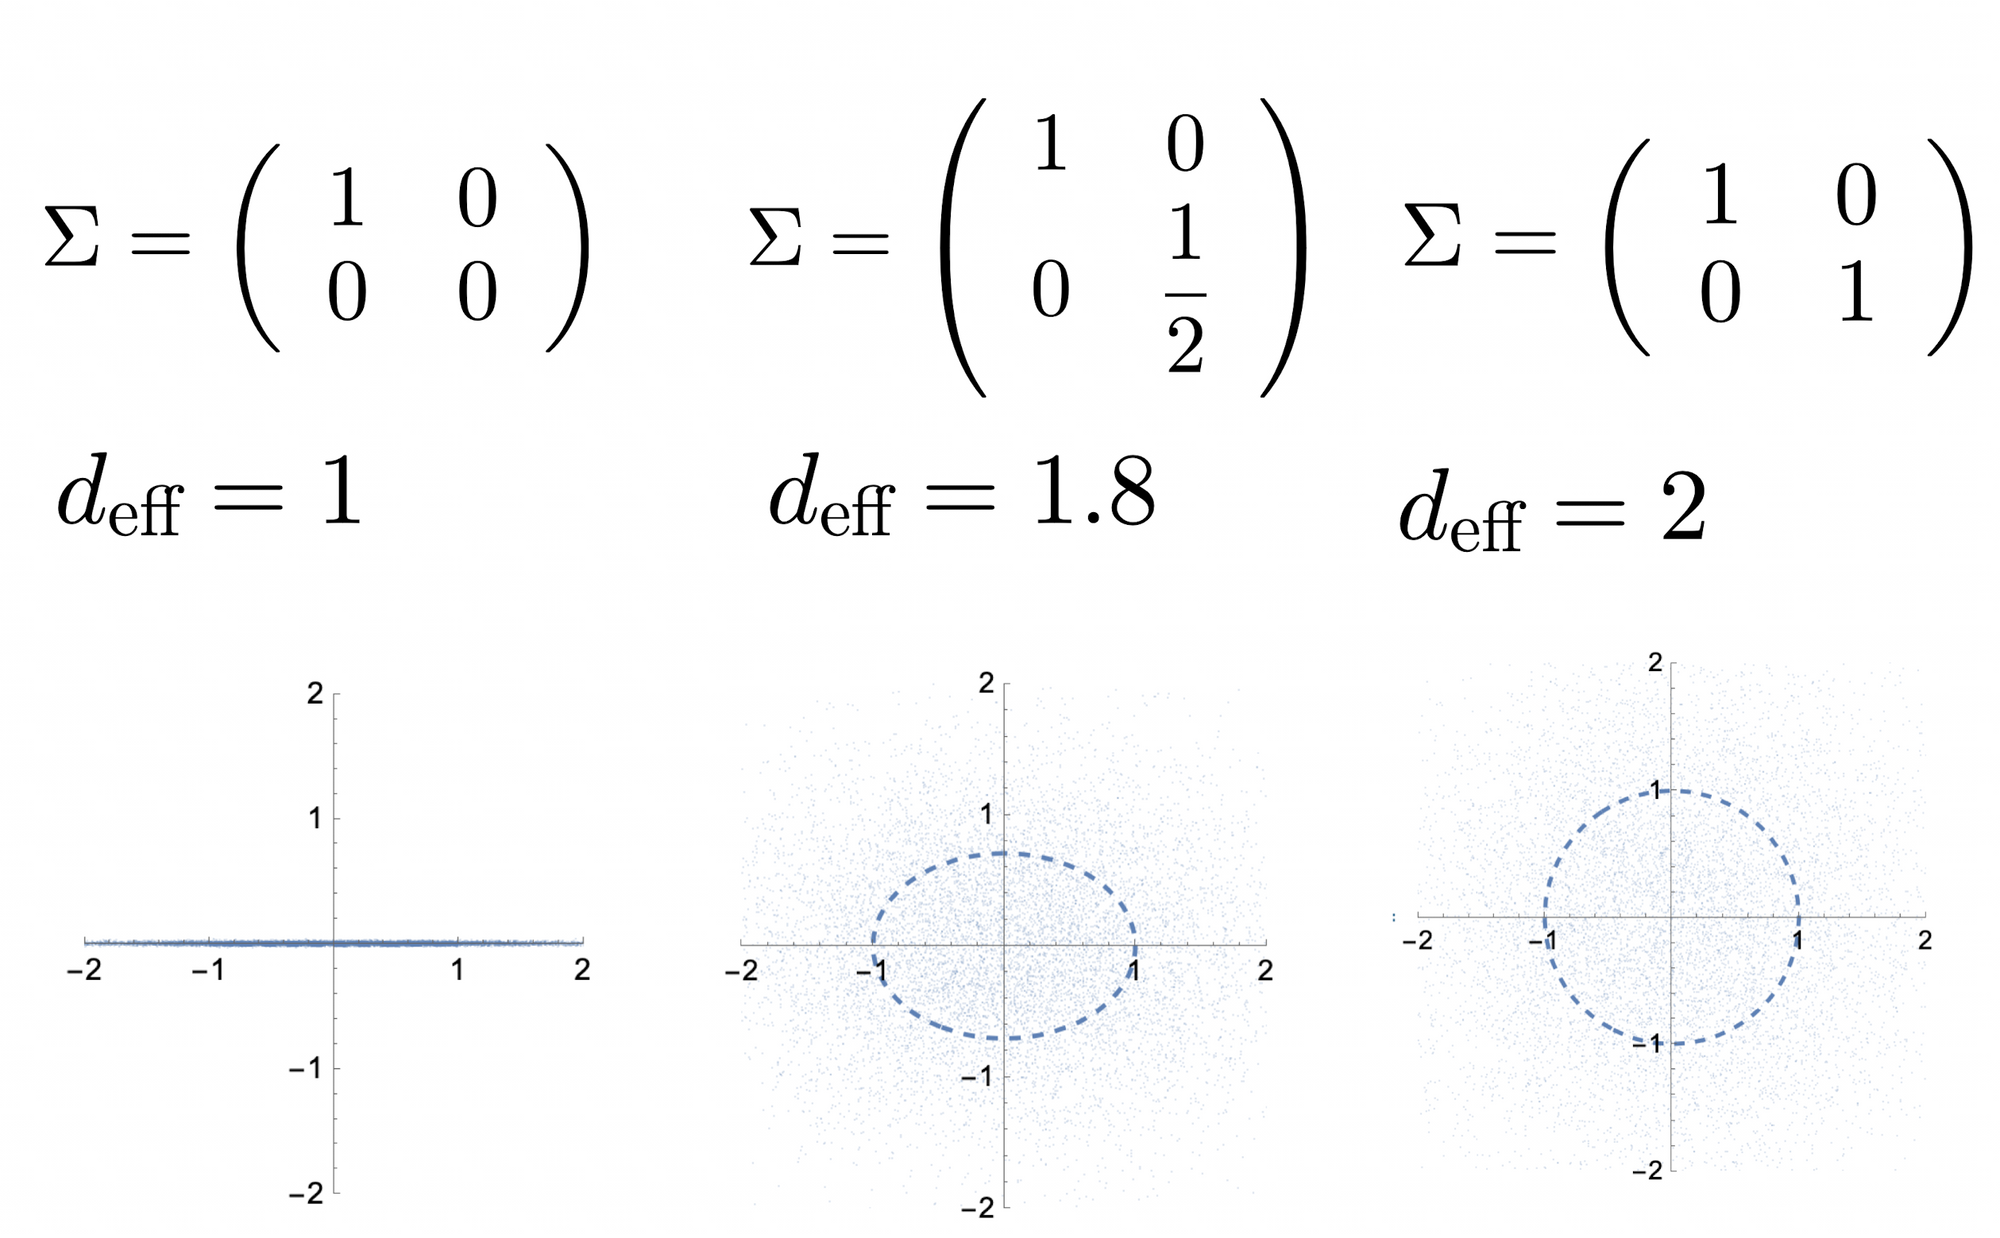 Critical batch-size and effective dimension in Ordinary Least Squares